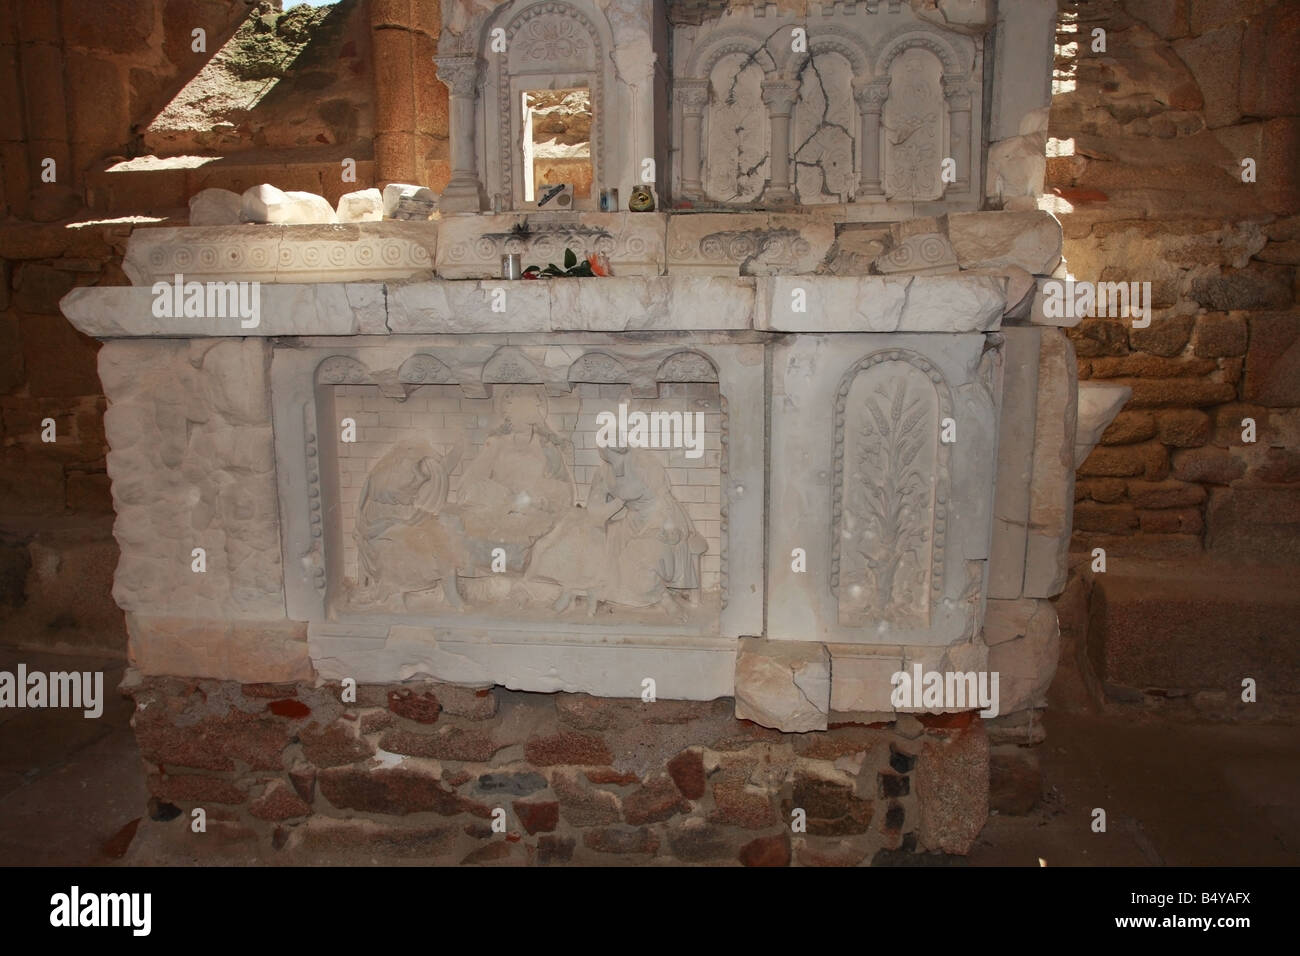 Altar Damaged by Gun Fire Inside the Chruch of Oradour sur Glane in the Haute Vienne Department 87 of France Stock Photo